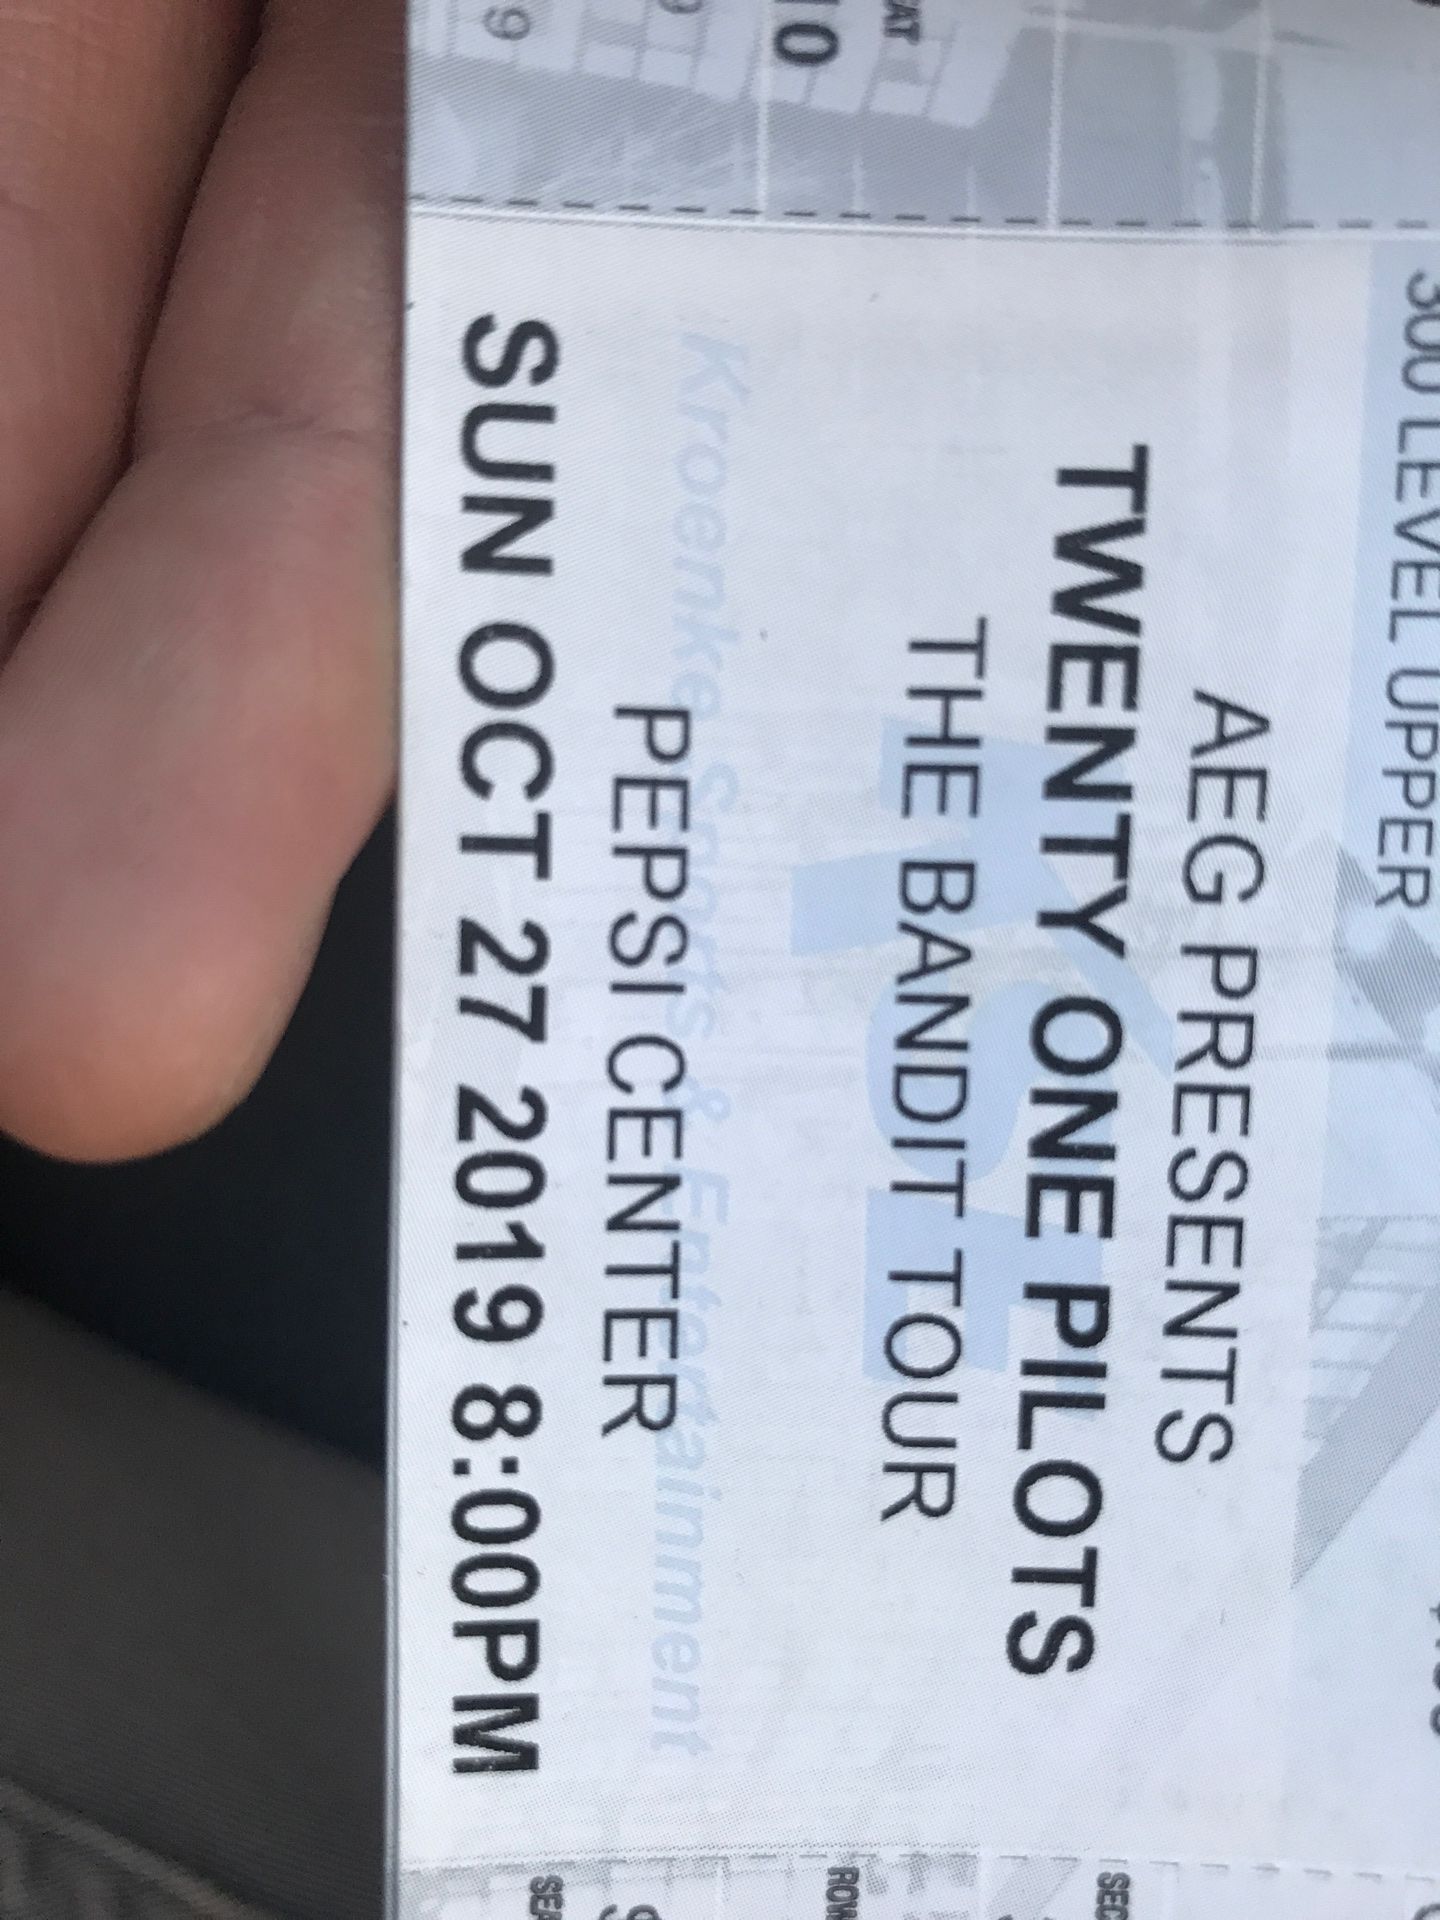 21 pilots tickets for sale